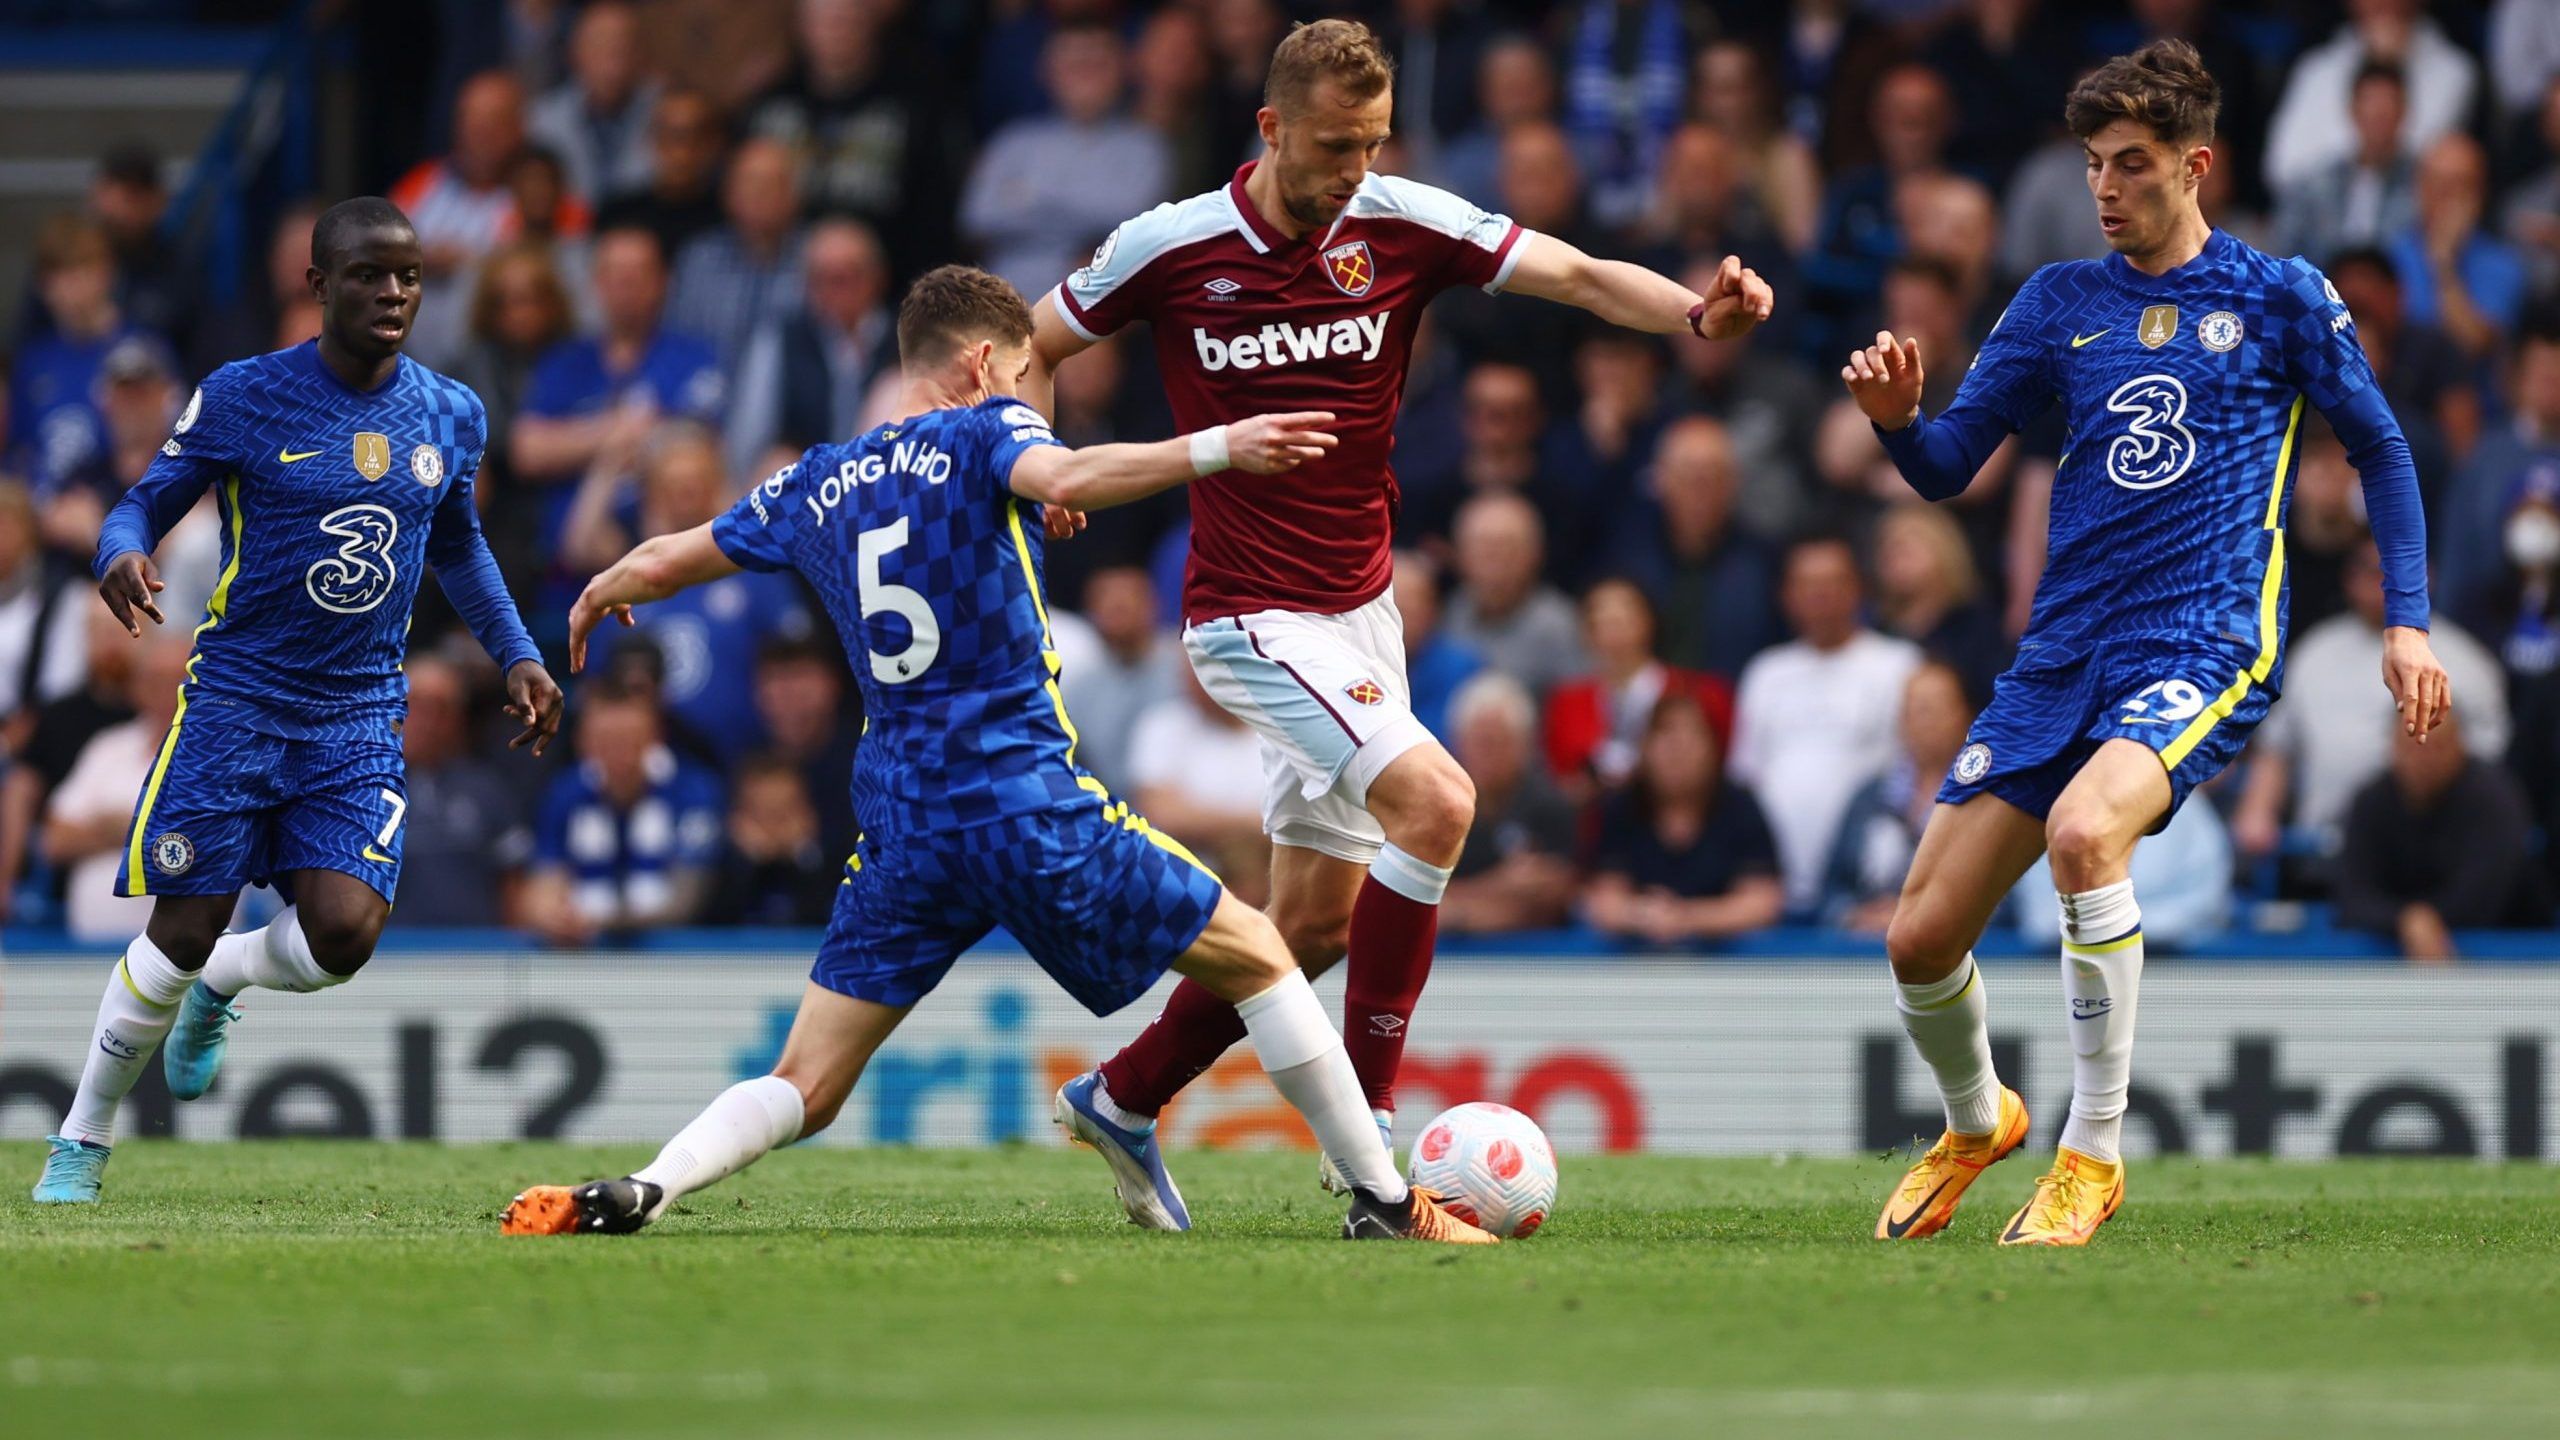 tomas-soucek-west-ham-united-vs-chelsea-west-ham-united-transfer-aston-villa-transfer-news-steven-gerrard-latest-summer-signingSoccer Football - Premier League - Chelsea v West Ham United - Stamford Bridge, London, Britain - April 24, 2022 West Ham United's Tomas Soucek in action with  Chelsea's Jorginho and Kai Havertz REUTERS/Hannah Mckay EDITORIAL USE ONLY. No use with unauthorized audio, video, data, fixture lists, club/league logos or 'live' services. Online in-match use limited to 75 image